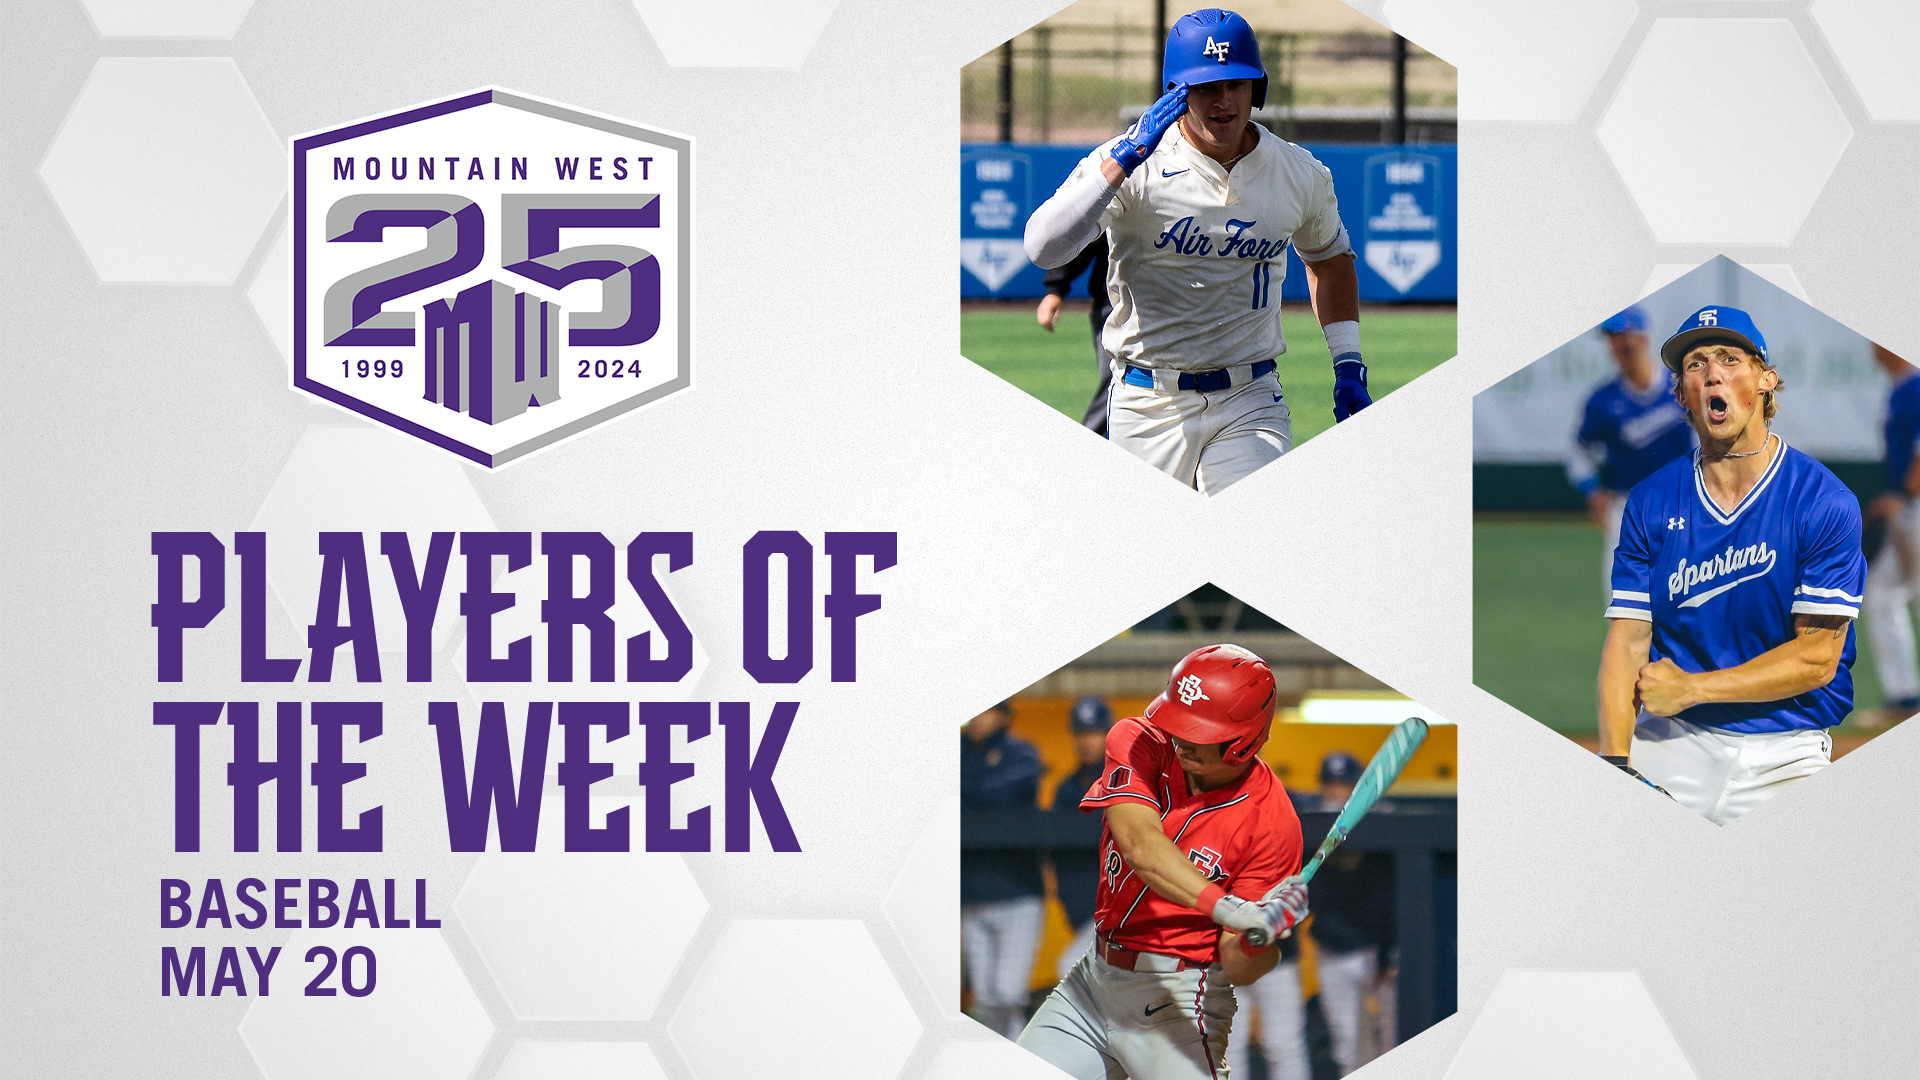 Mountain West Baseball Player of the Week - May 20